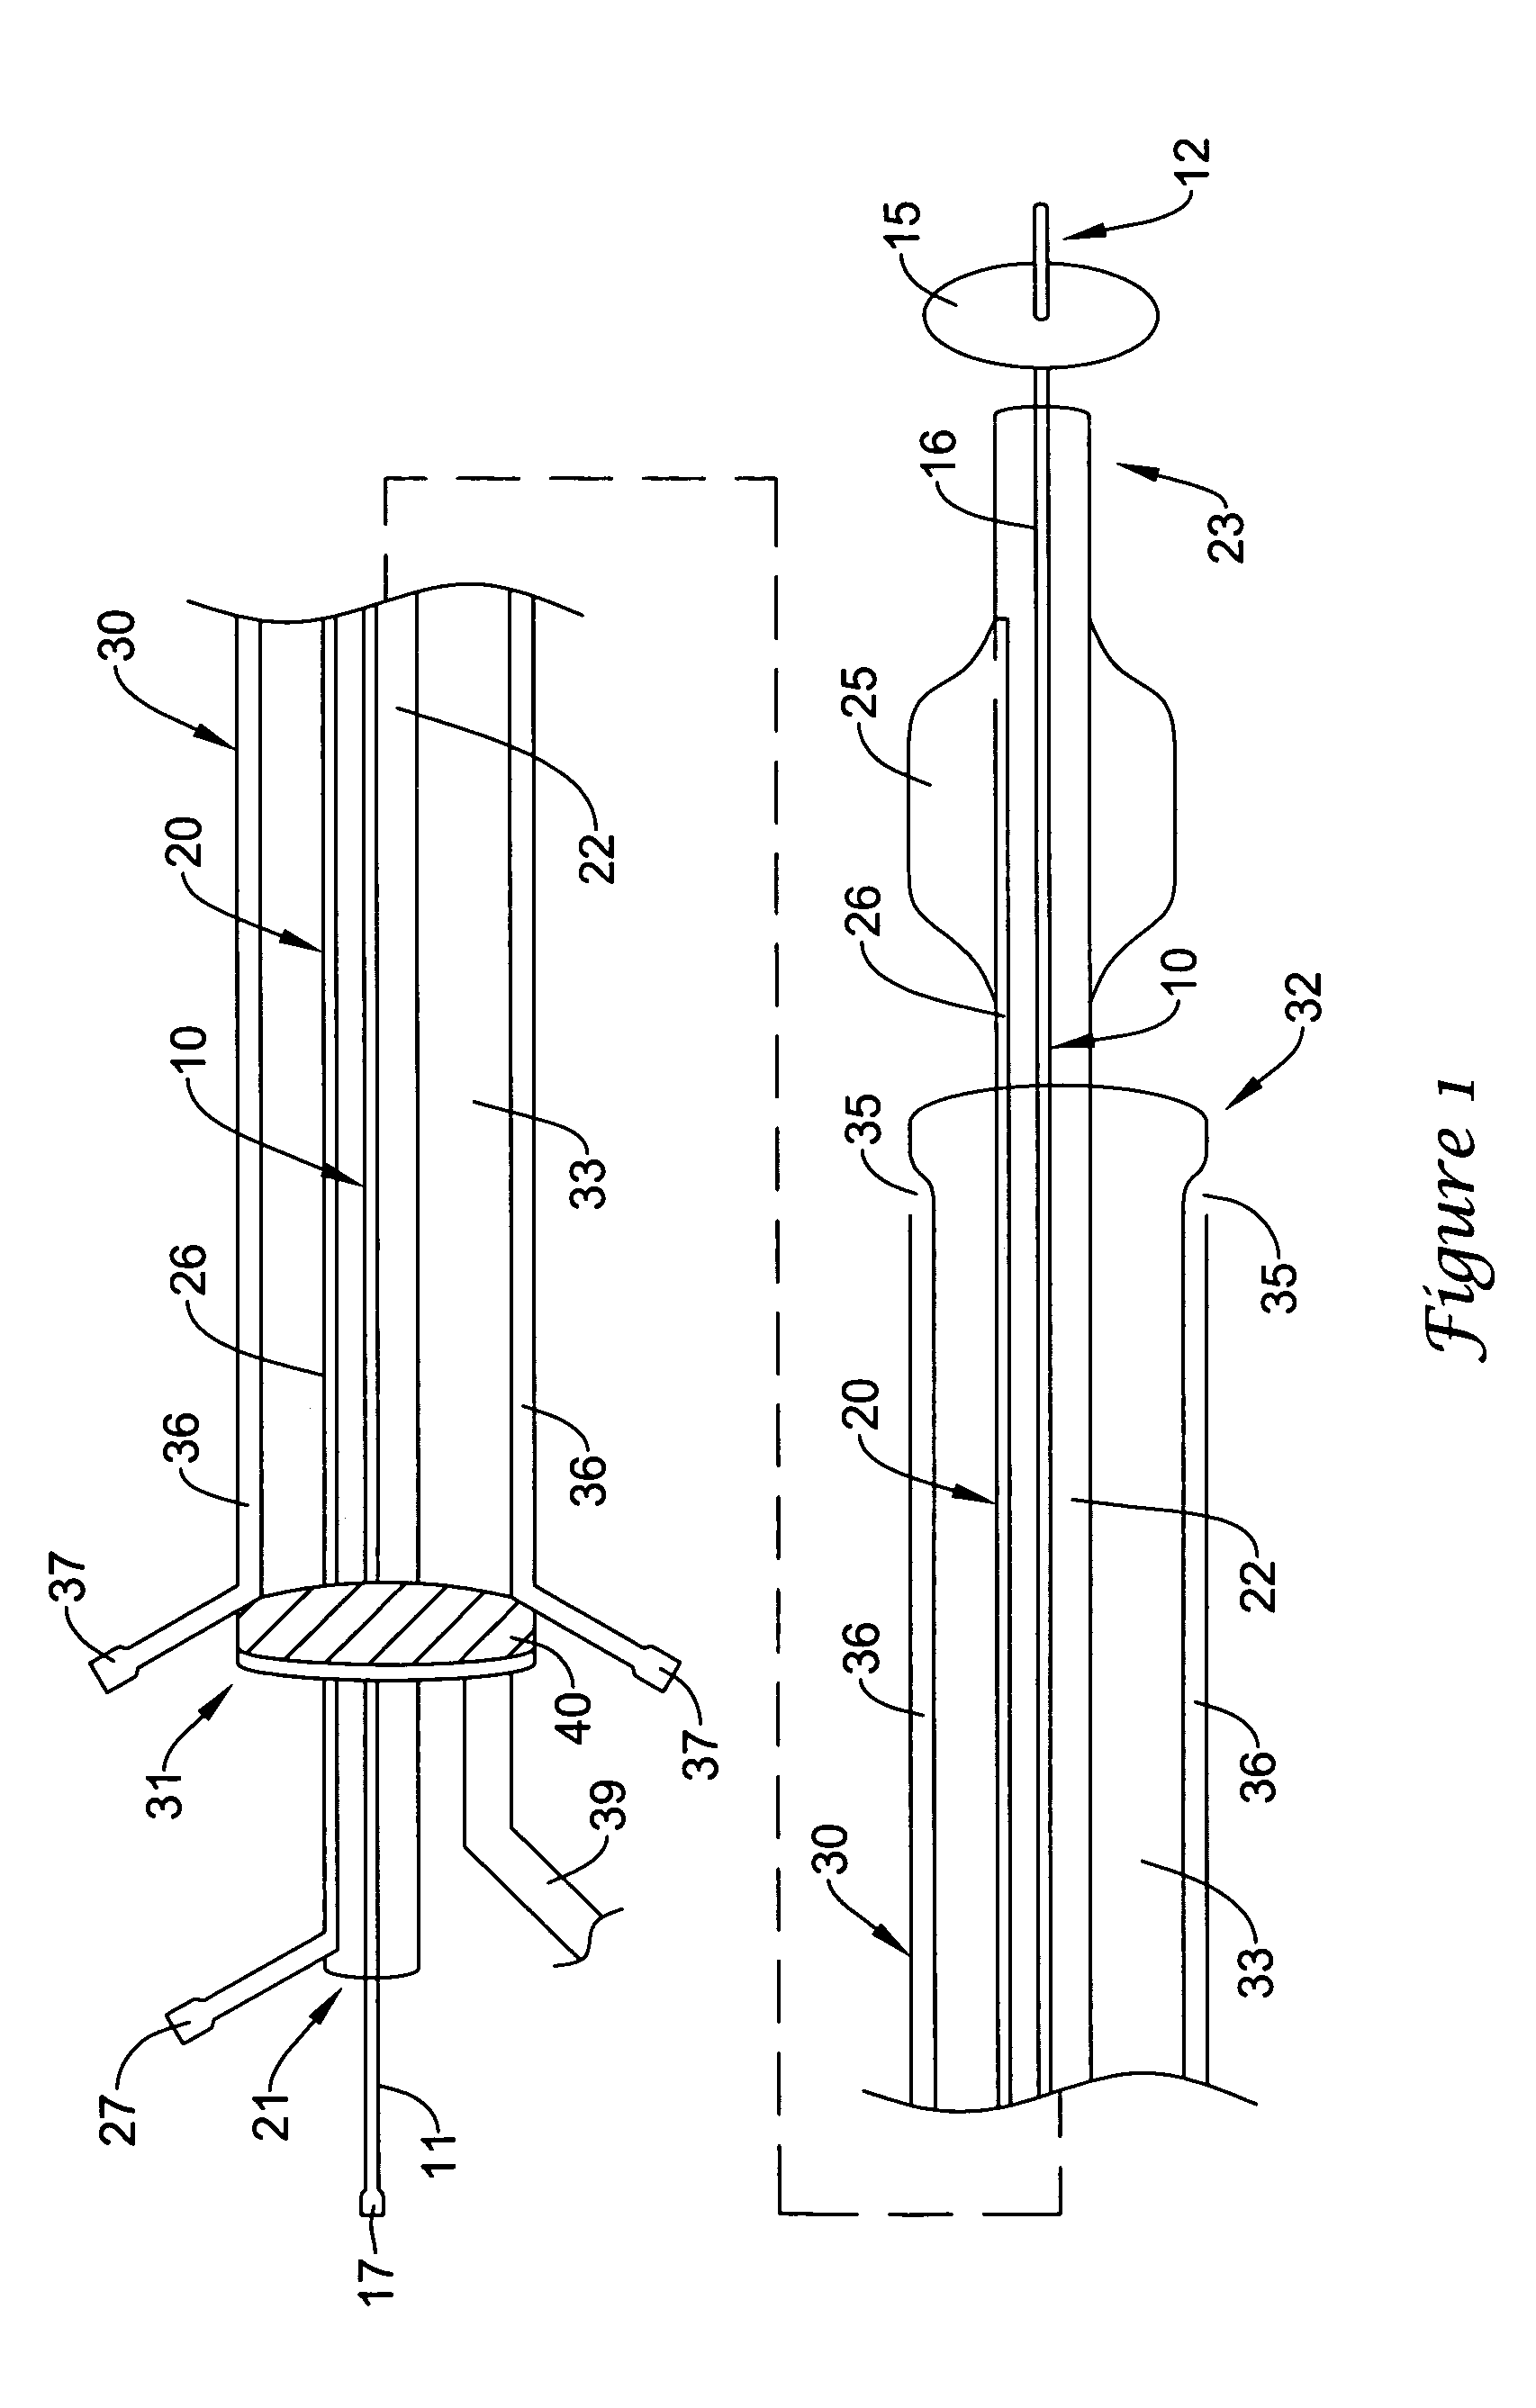 Endoluminal occlusion-irrigation catheter with aspiration capabilities and methods of use